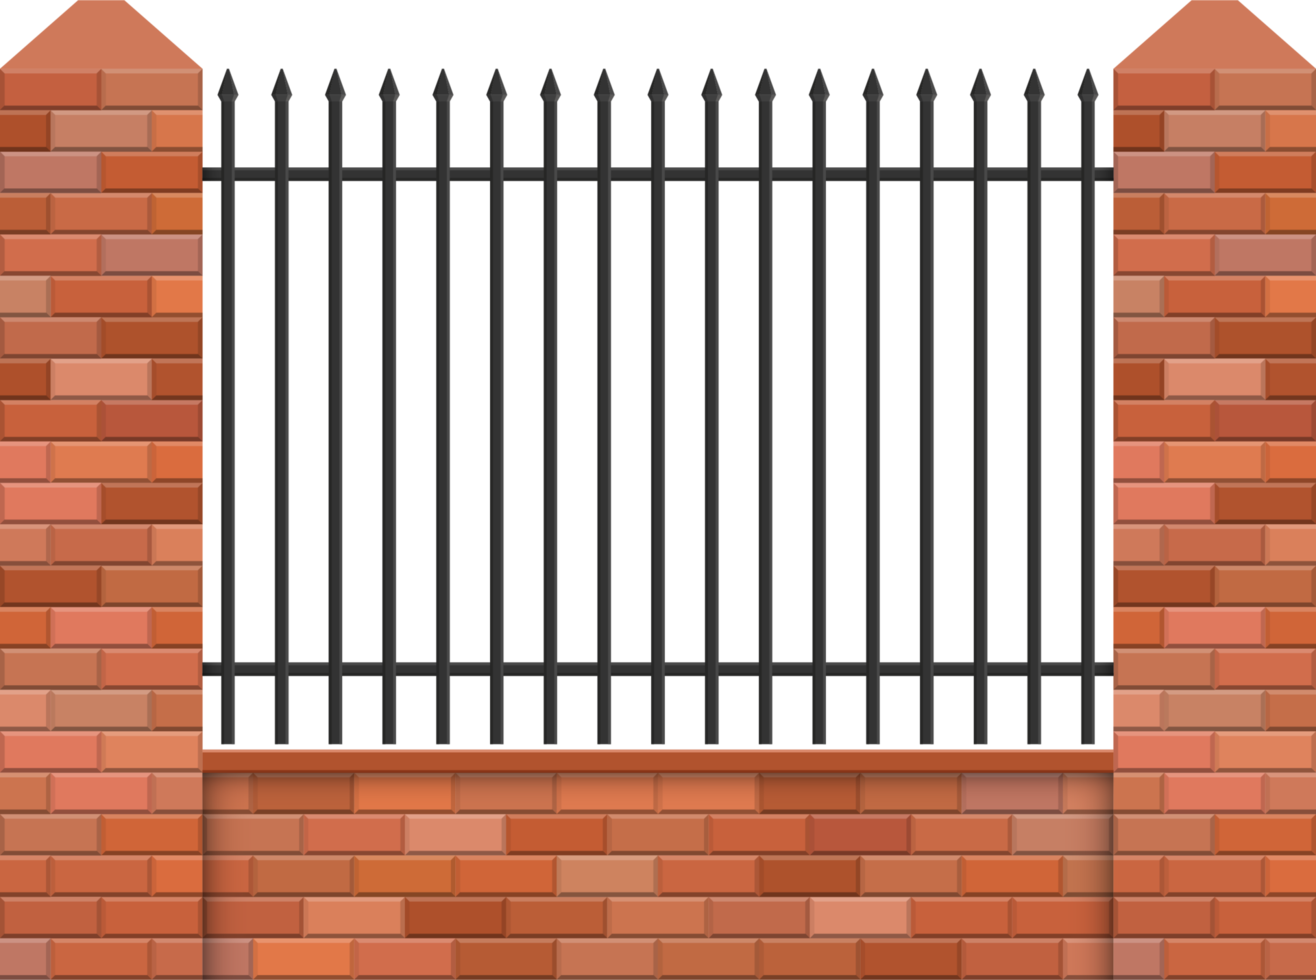 Brick fence vector illustration isolated on white background png